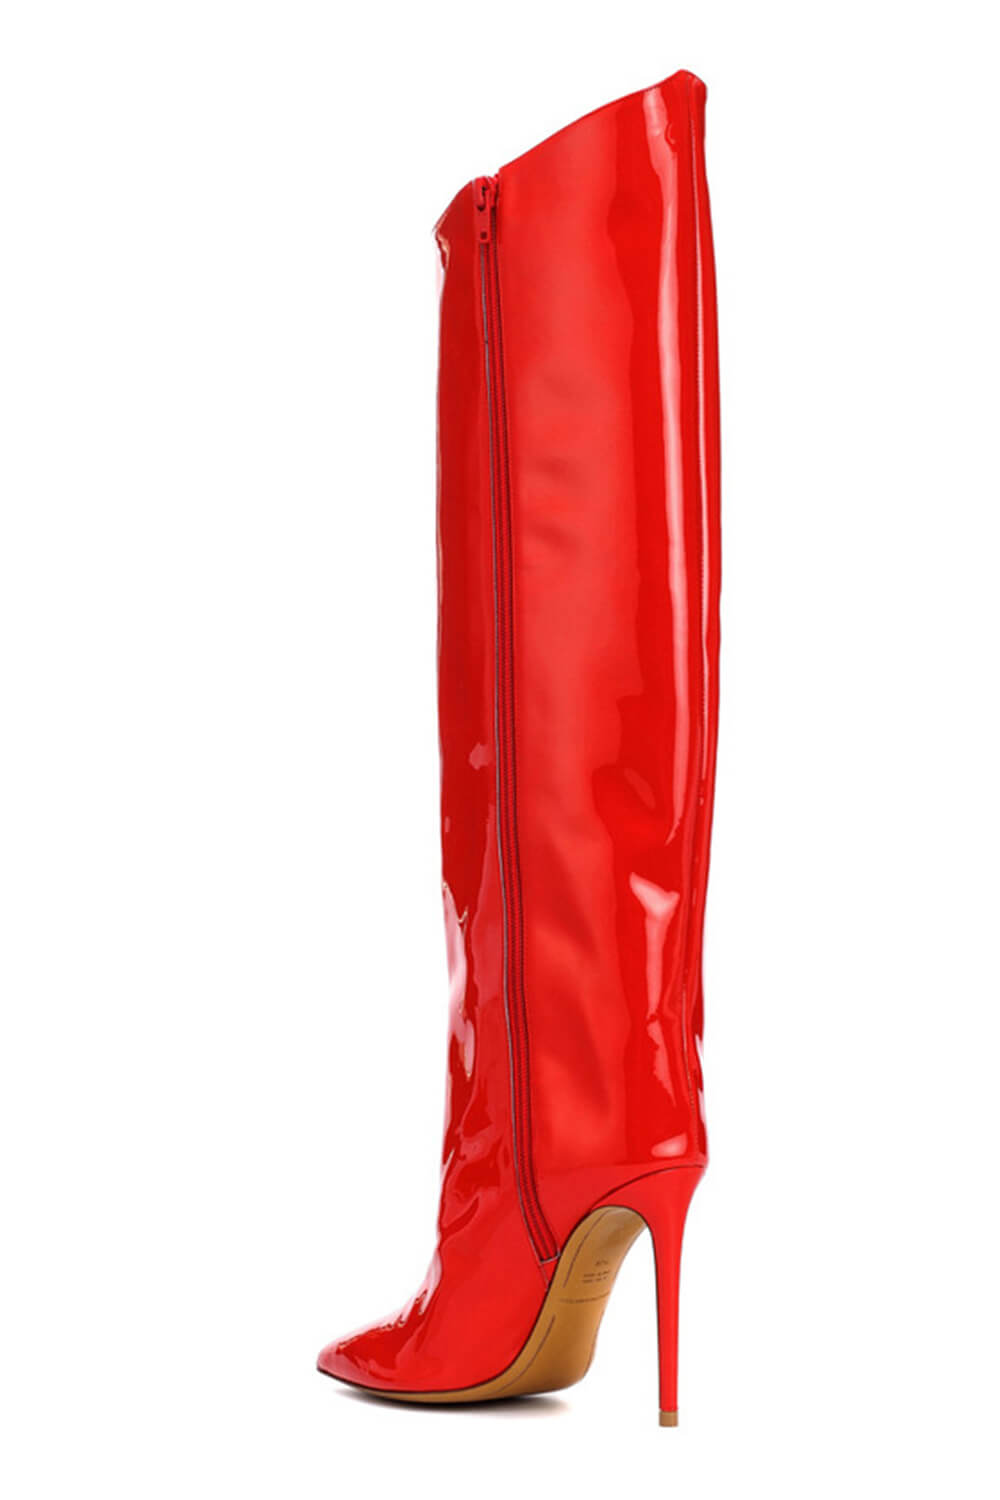 Metallic Finish Knee-High Pointed Toe Stiletto Boots -Red